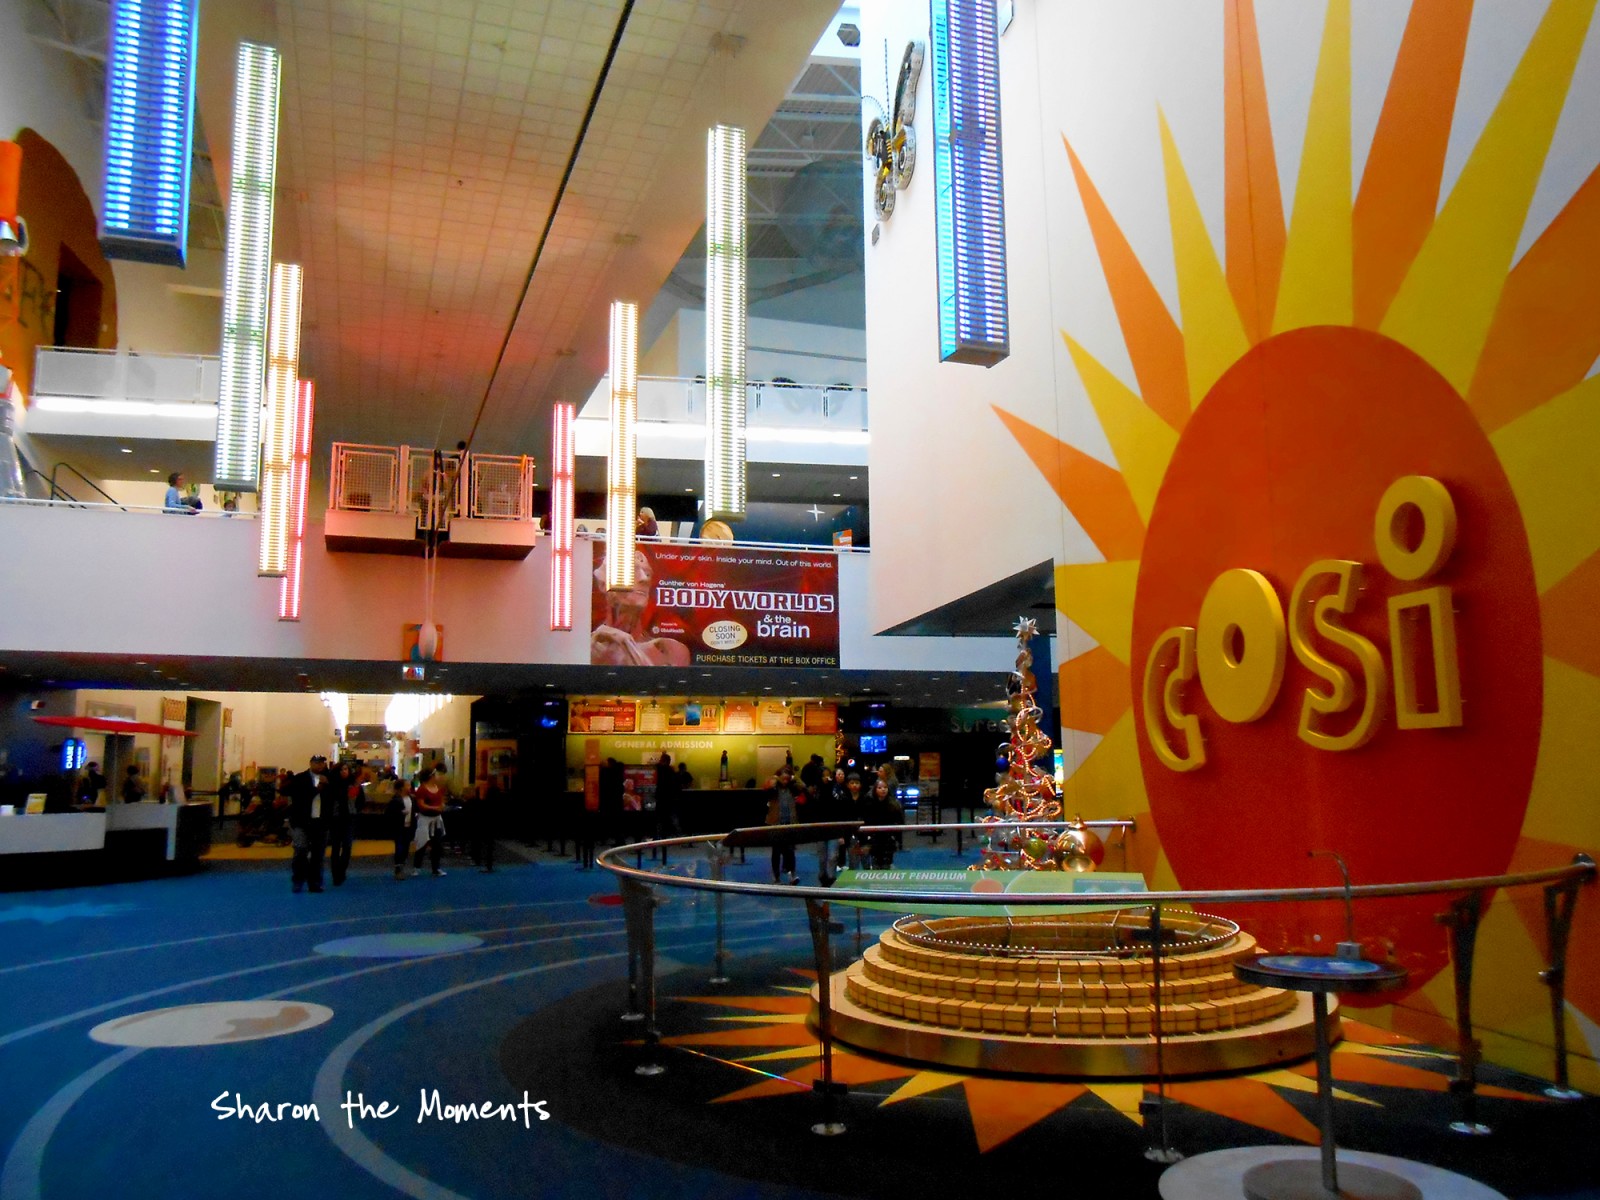 COSI Center of Science & Industry Visit for Christmas Eve Day Fun|Sharon the Moments blog